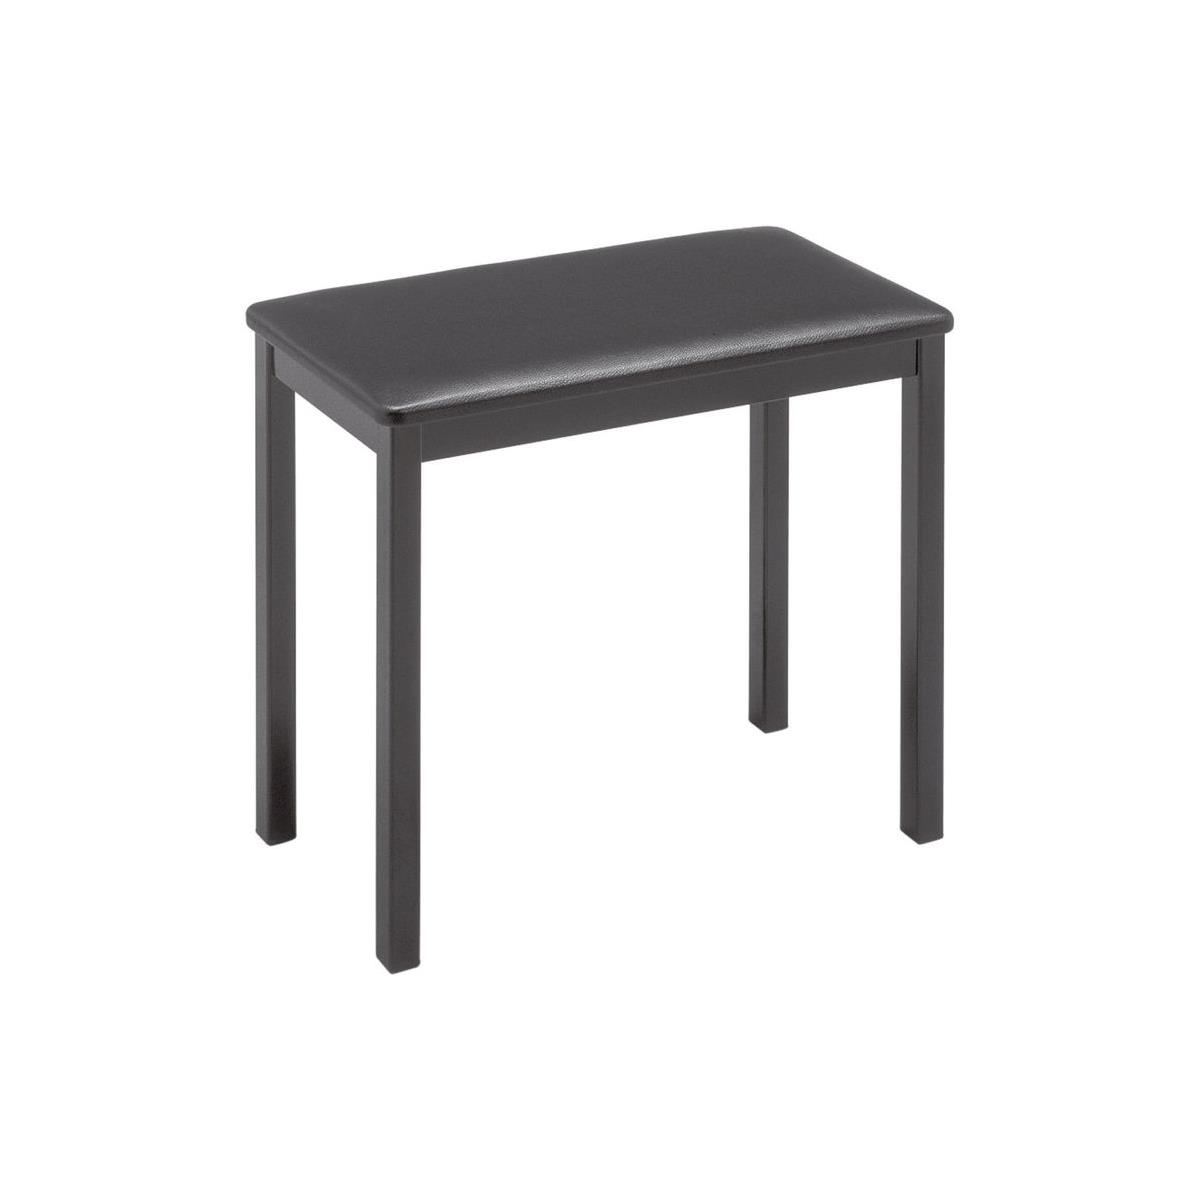 Image of Casio CB7 Metal Bench with Padded Seat